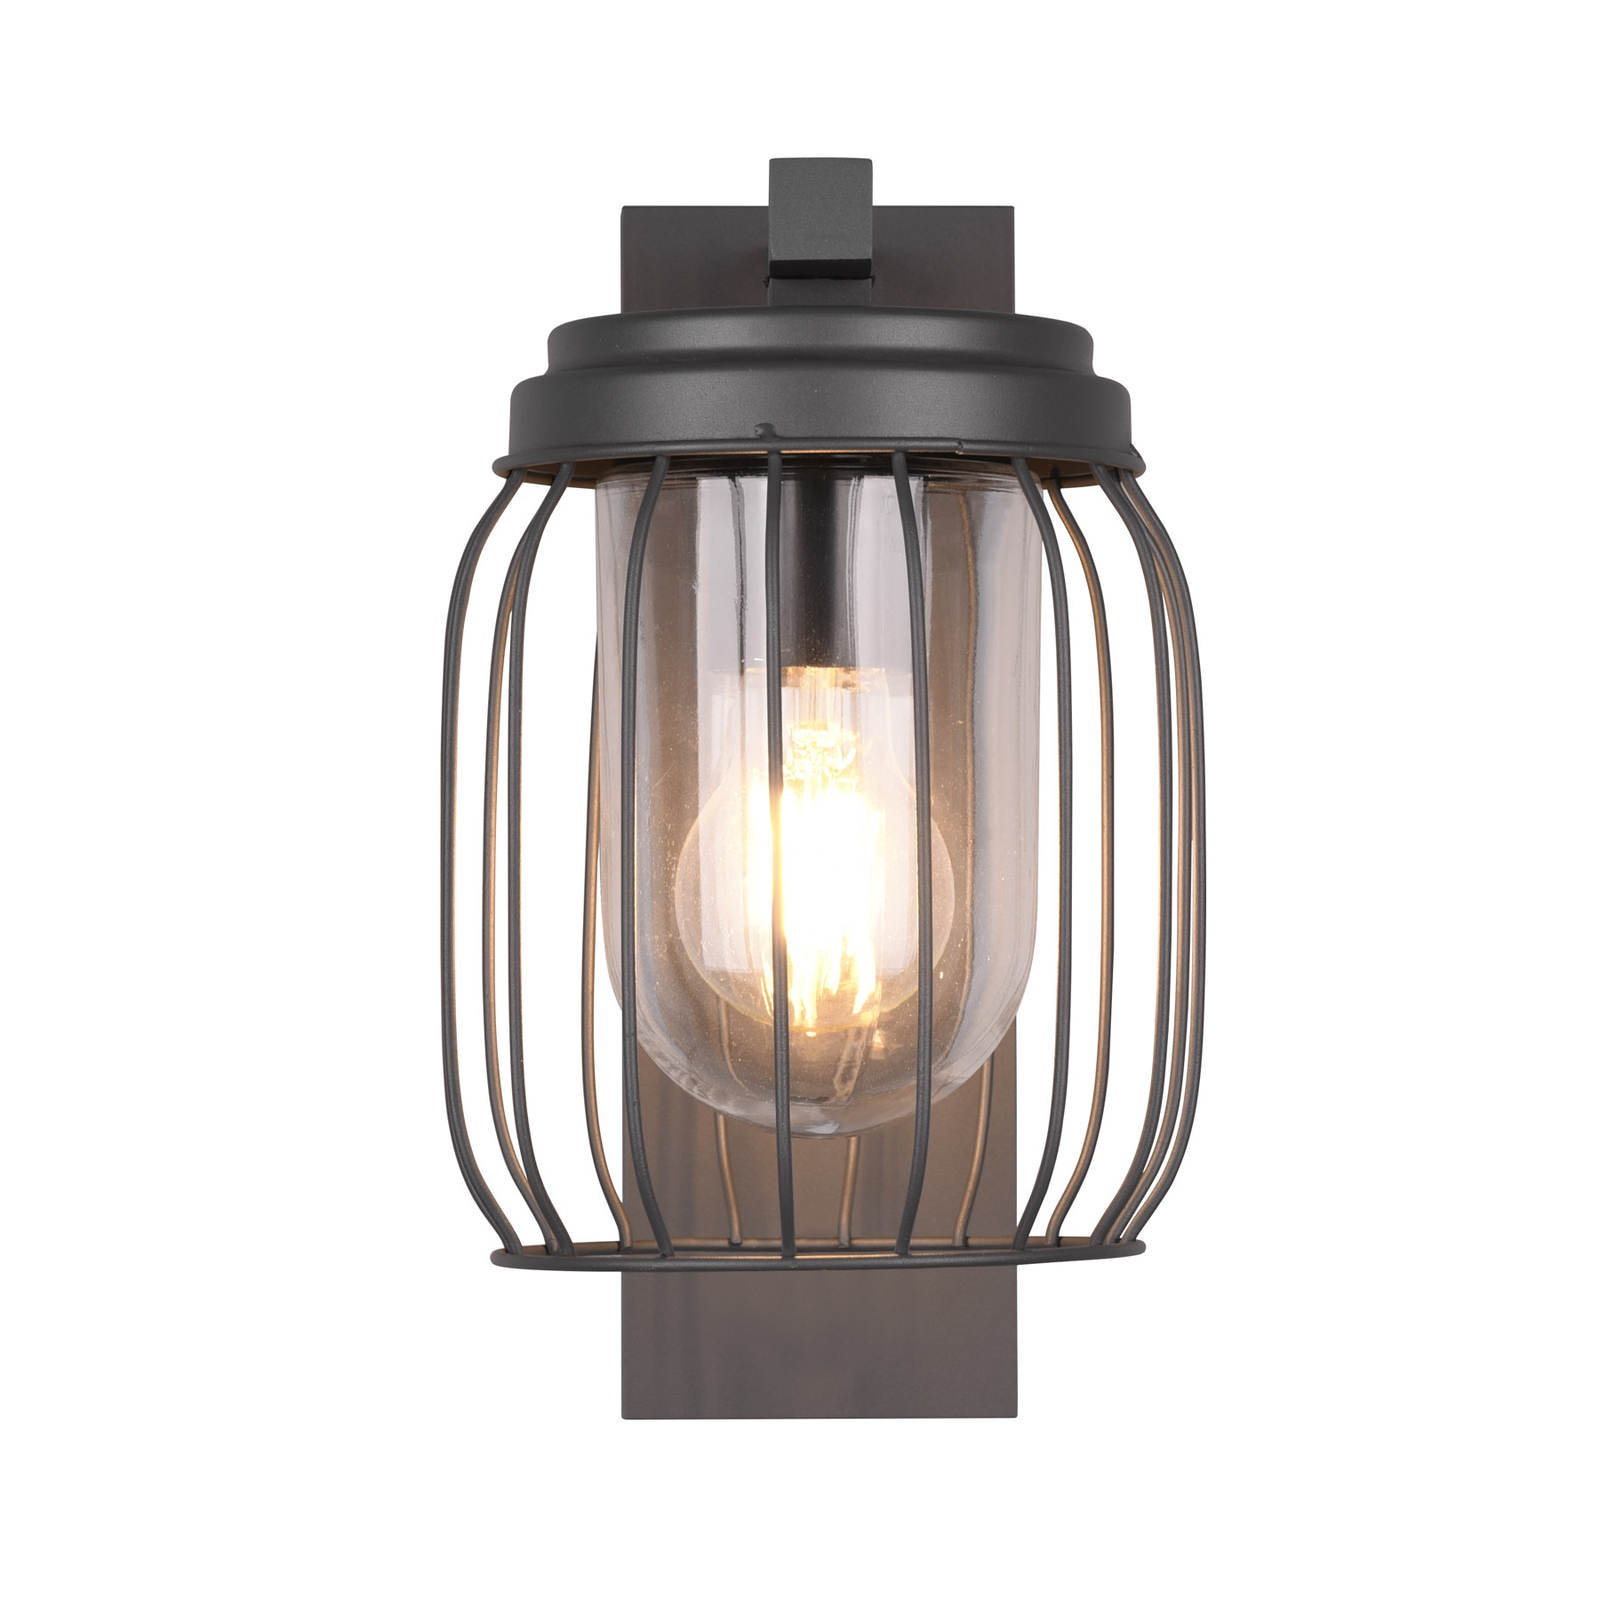 Outdoor wall light Tuela, anthracite